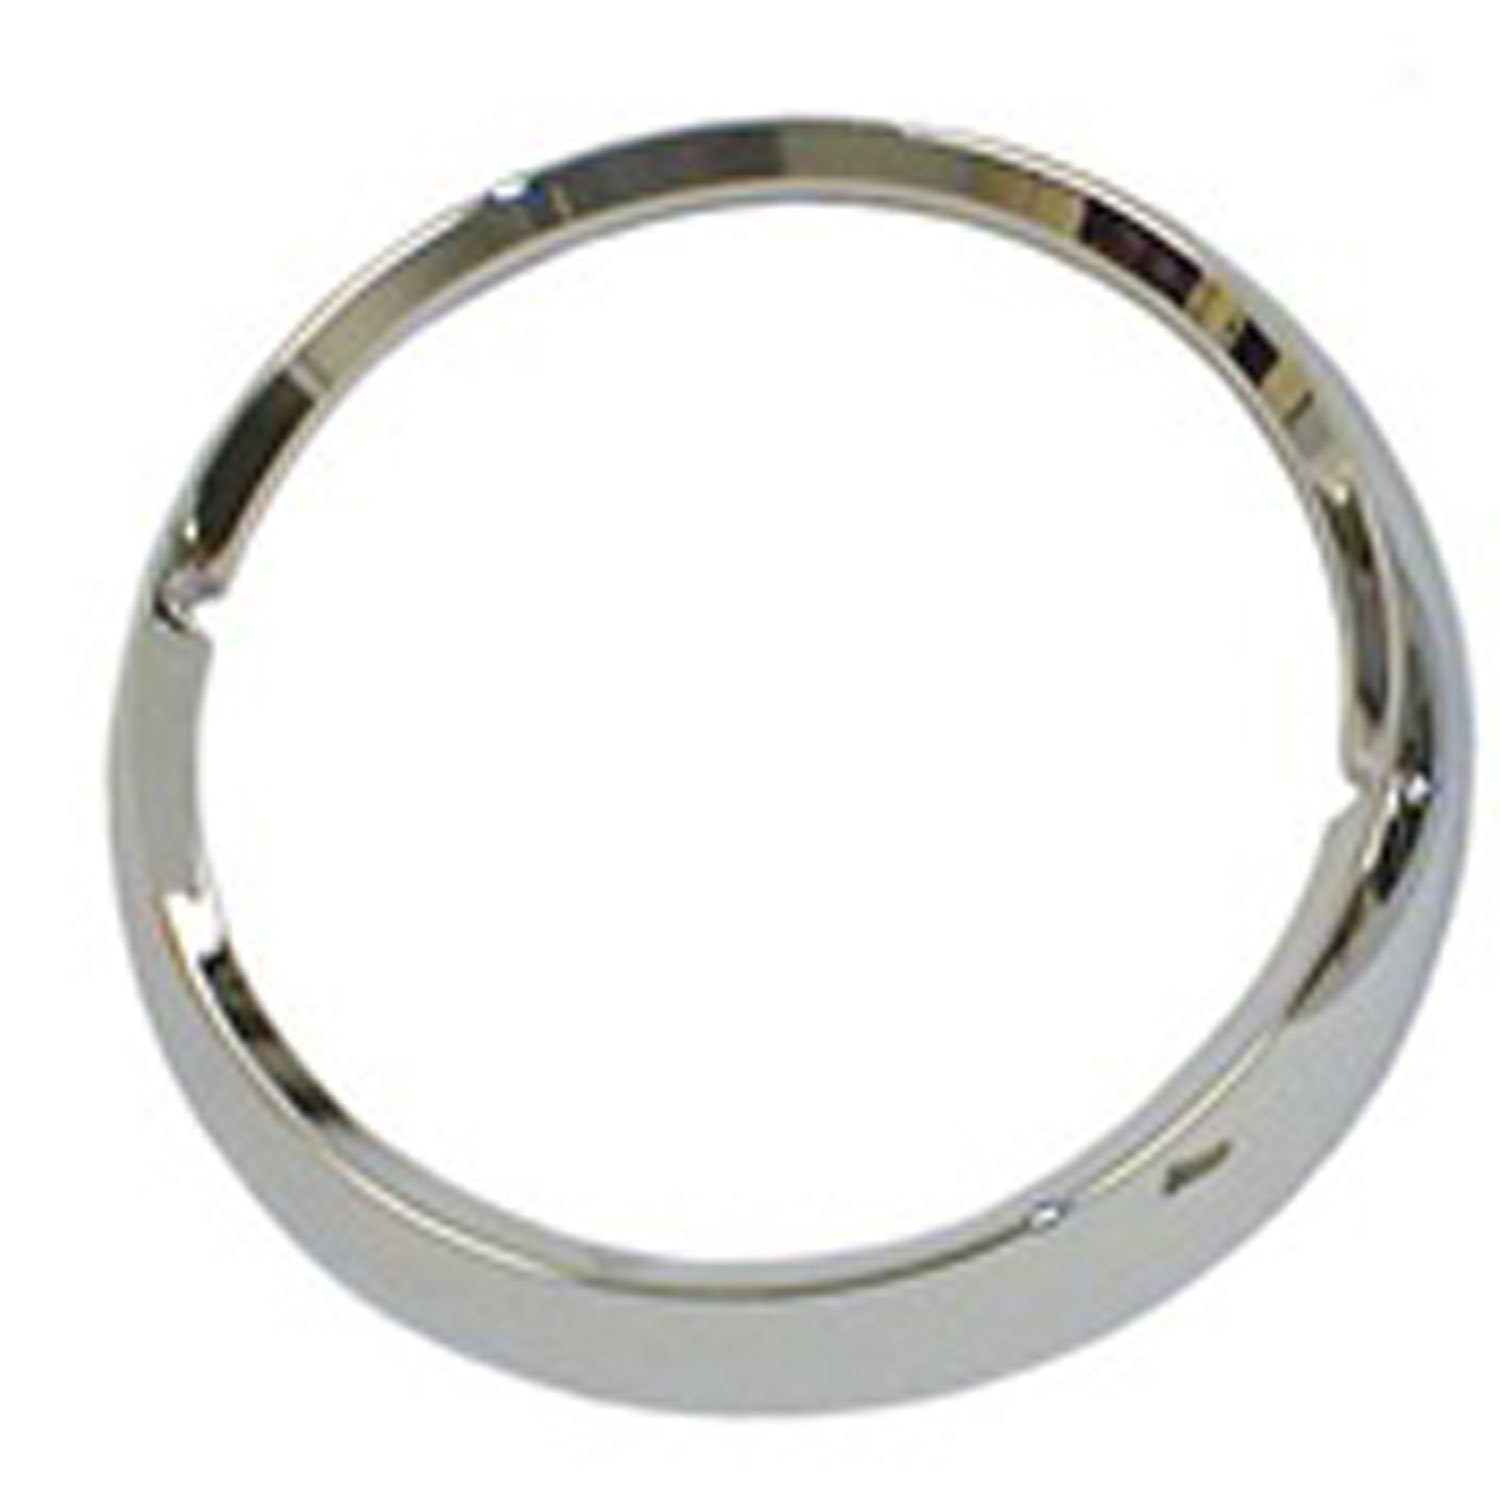 This chrome headlight bezel from Omix-ADA fits 72-86